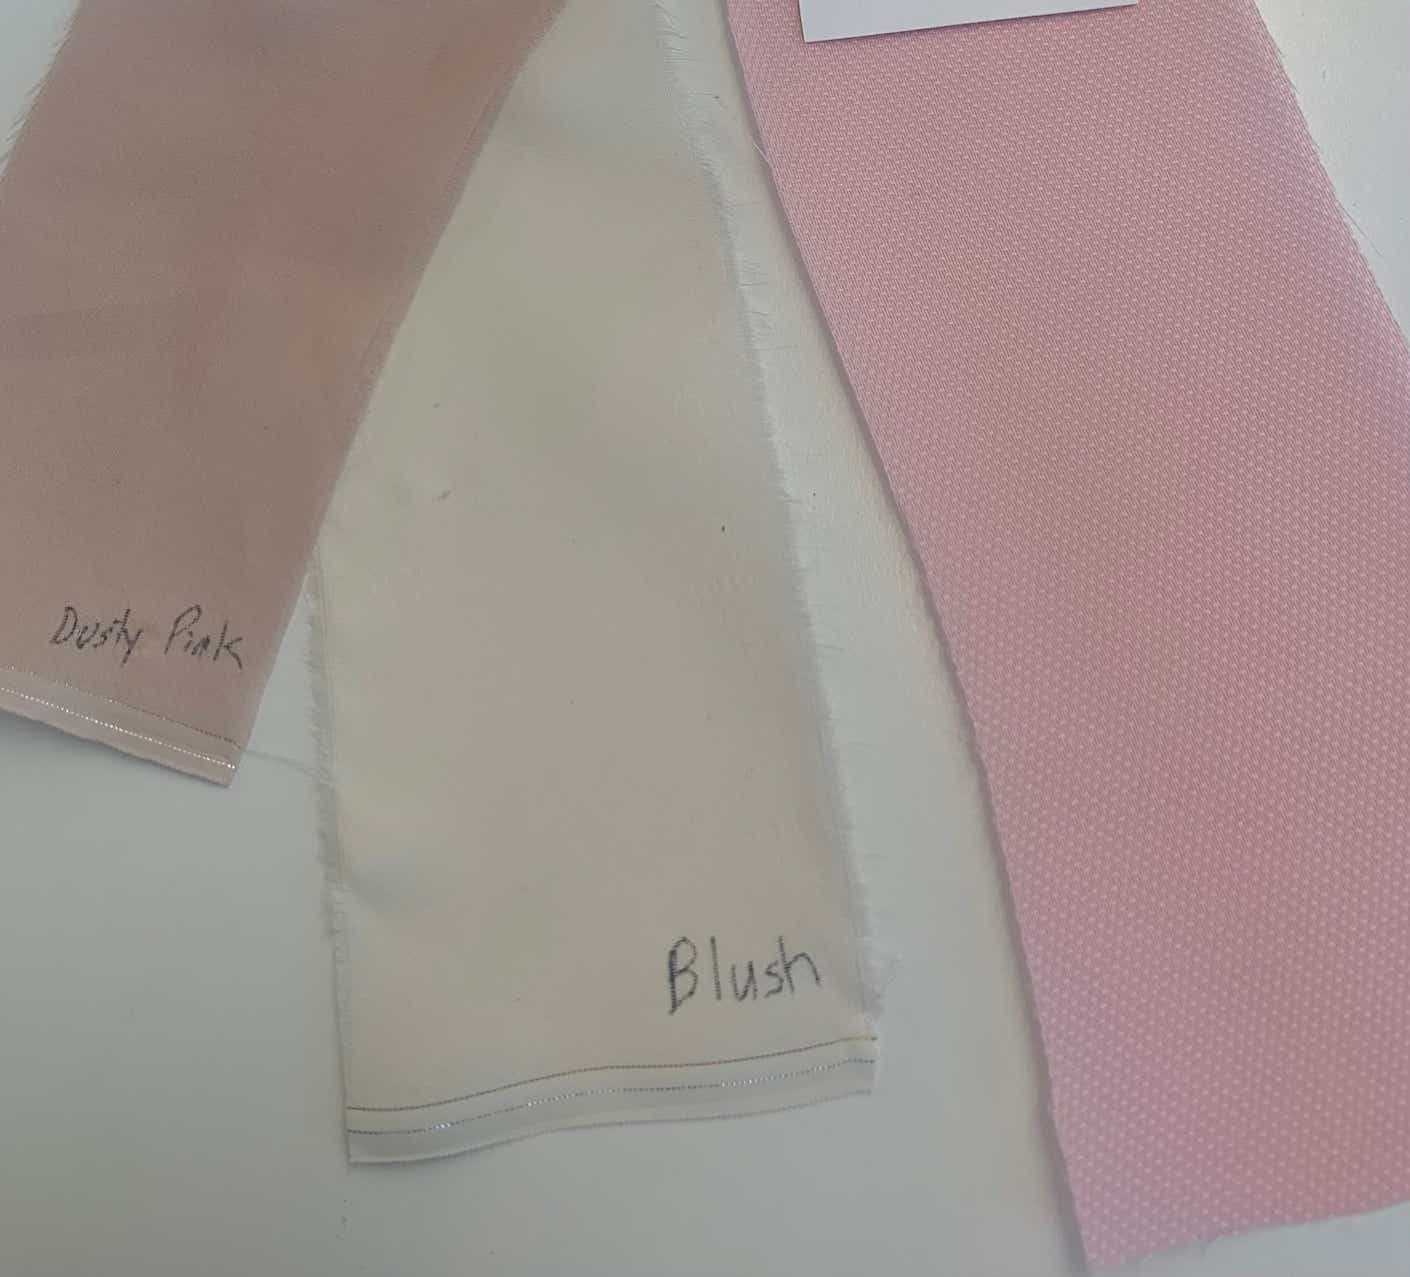 fabric swatches in different shades of pink